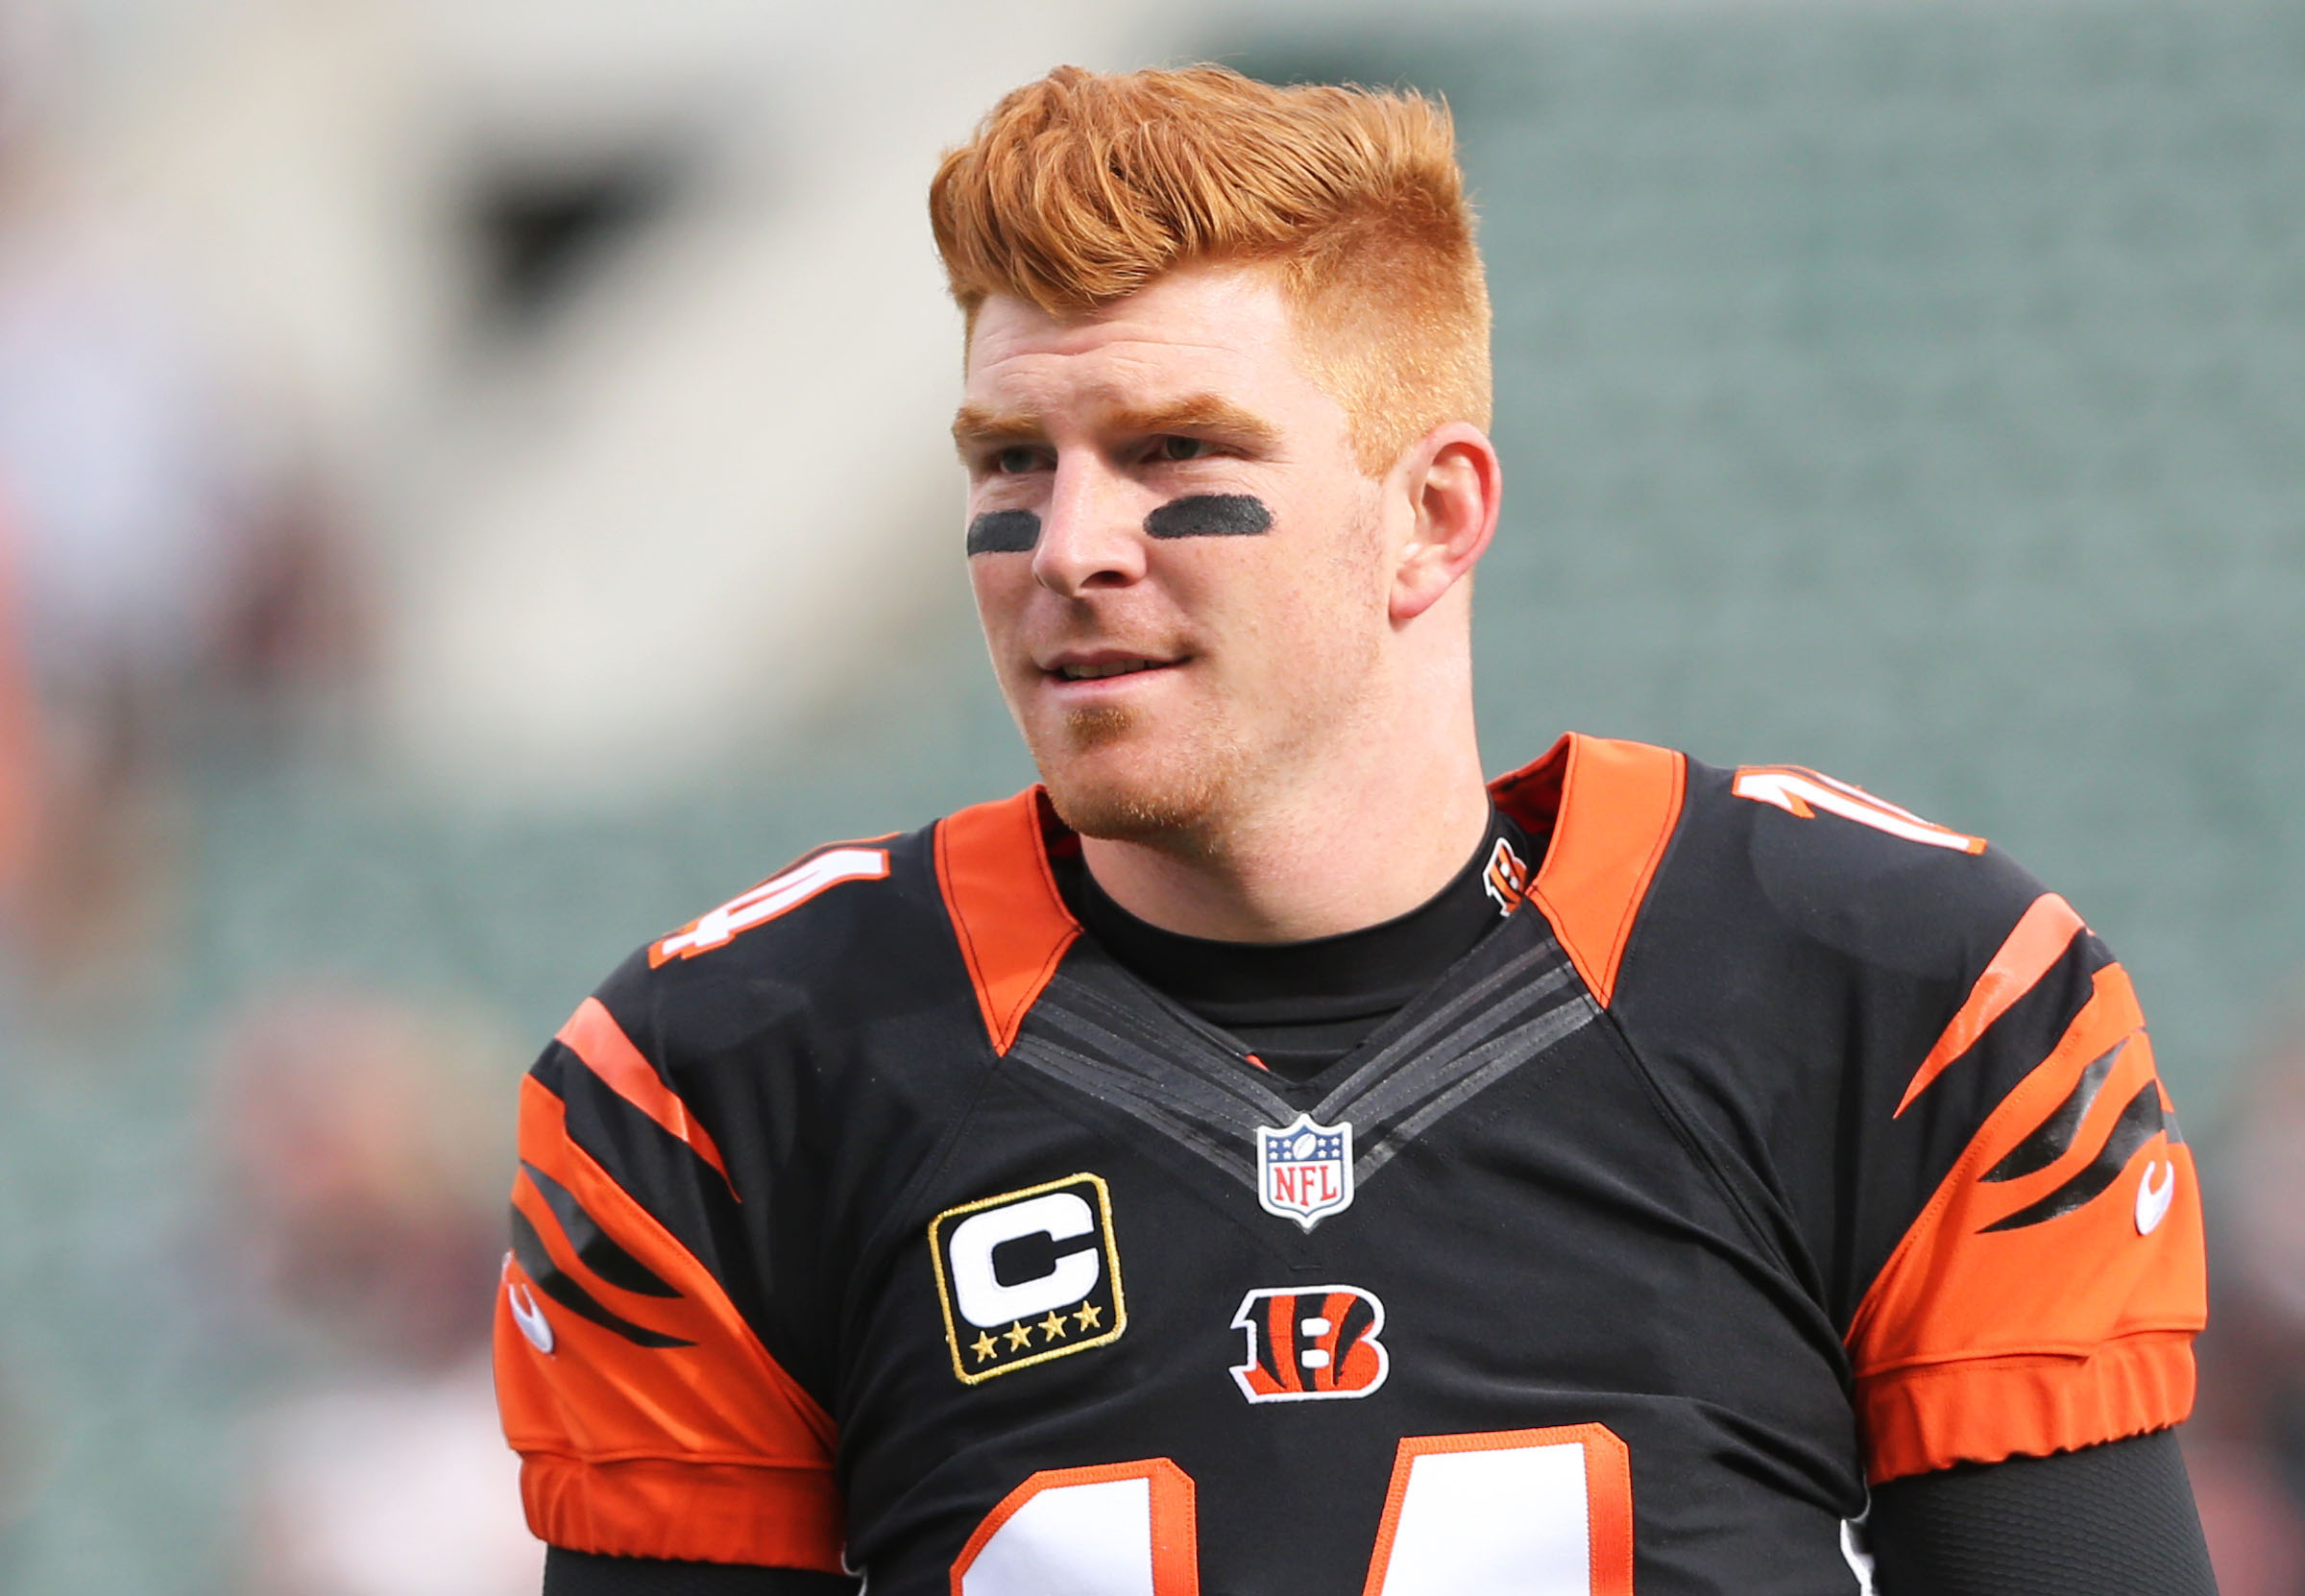 Andy Dalton is playing his best football to date this season.